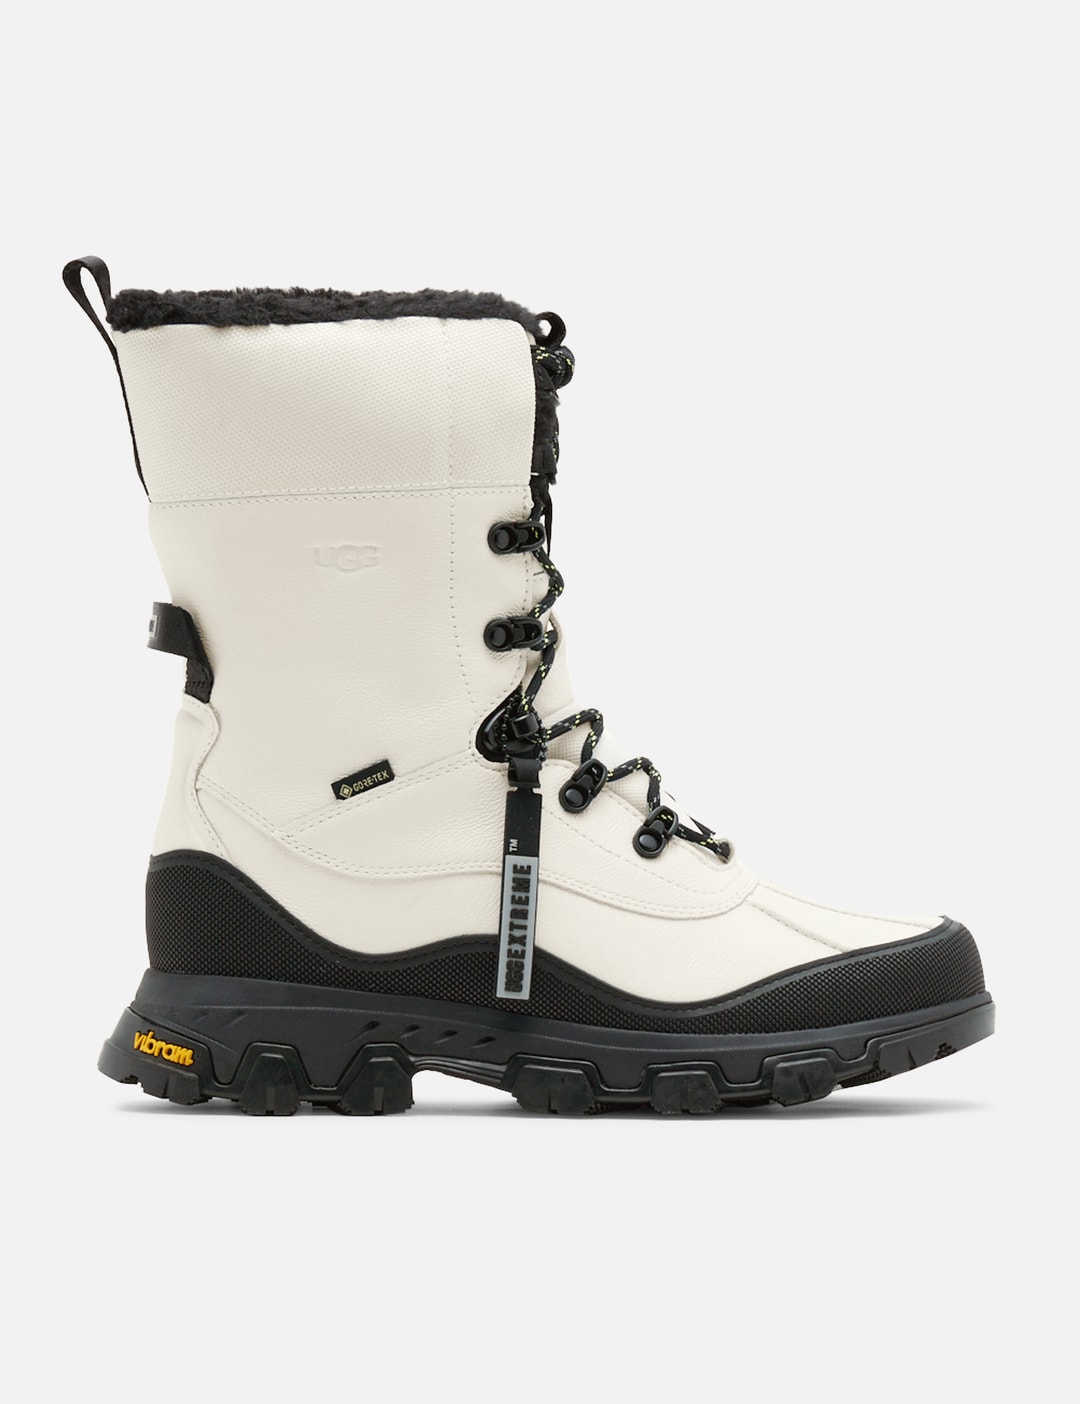 UGG - Adirondack Meridian Boots | HBX - Globally Curated Fashion and ...